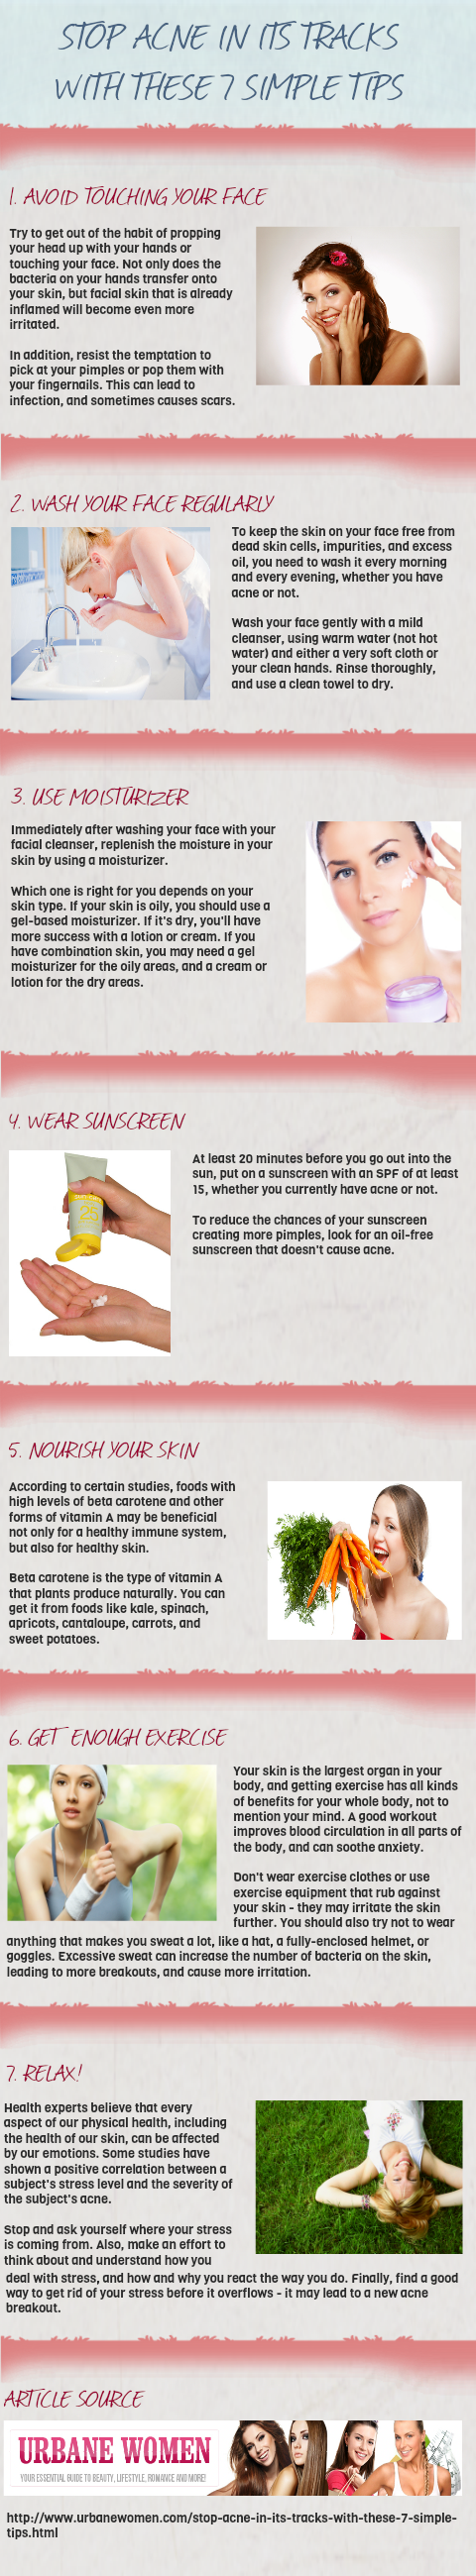 7 Tips to Prevent Acne